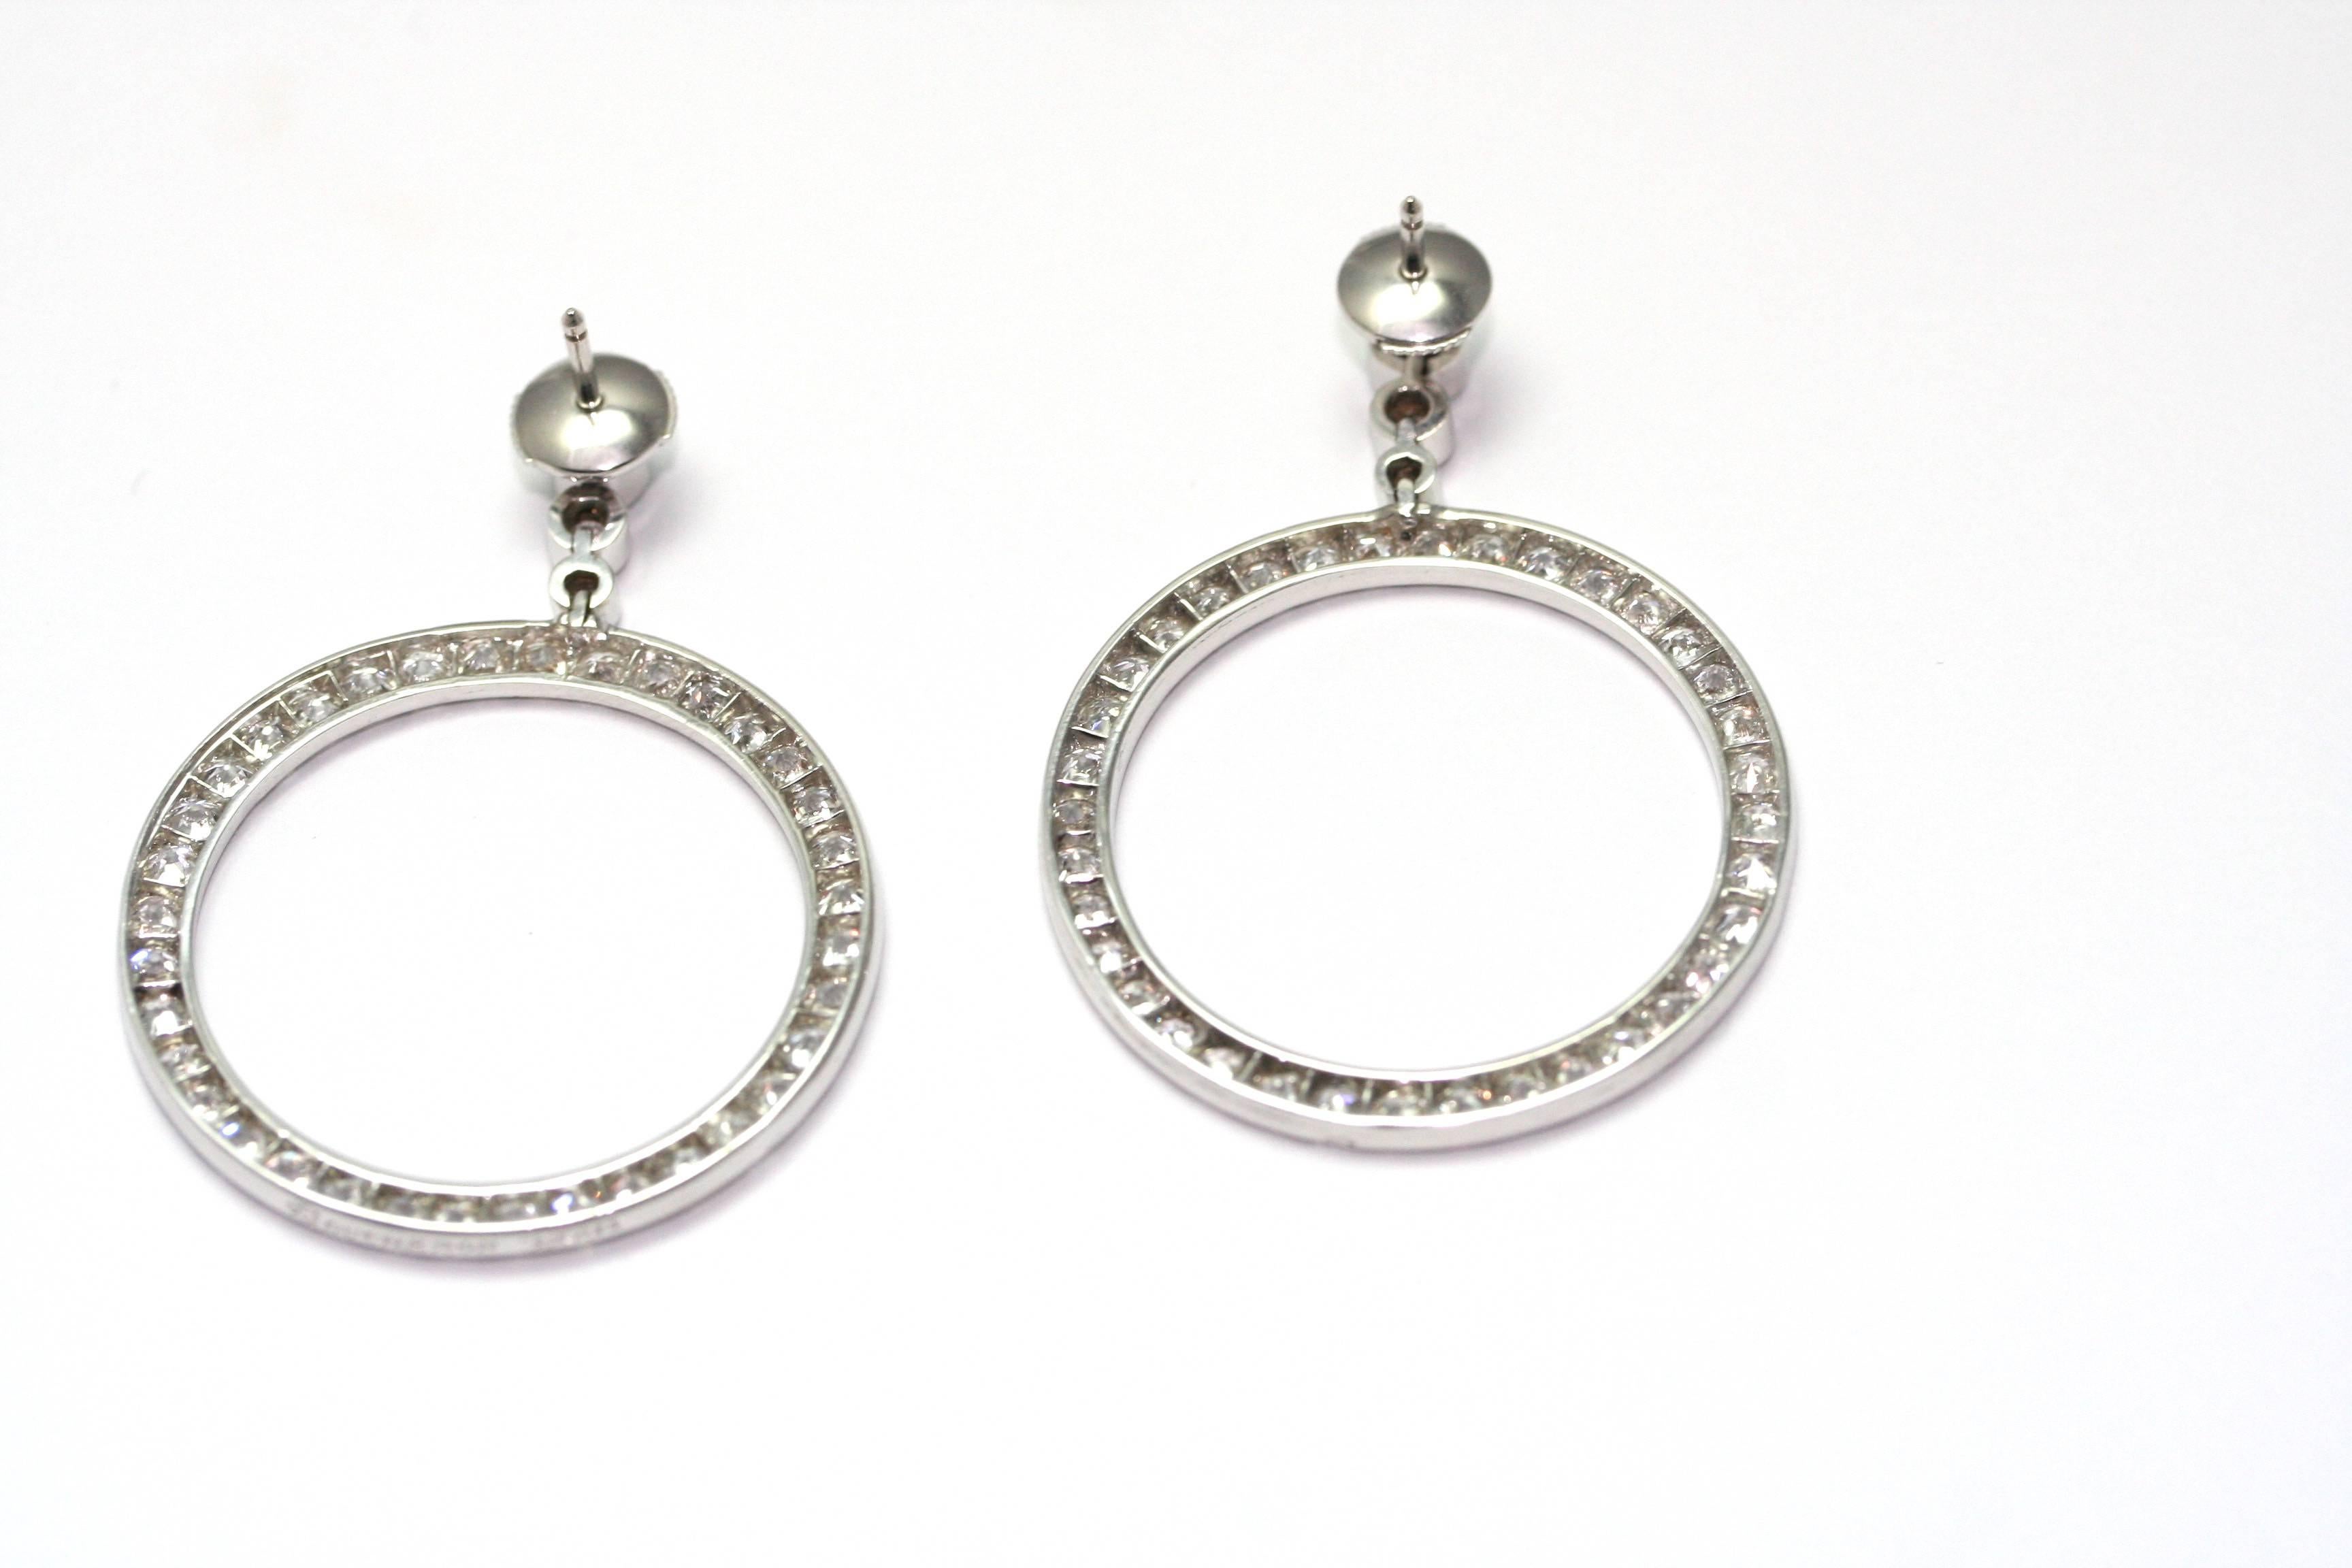 BOUCHERON Paris Pair of earrings circa 1930, creoles, in platinum set with diamonds carved in brilliant.
Signed. 
(11,55 grs)